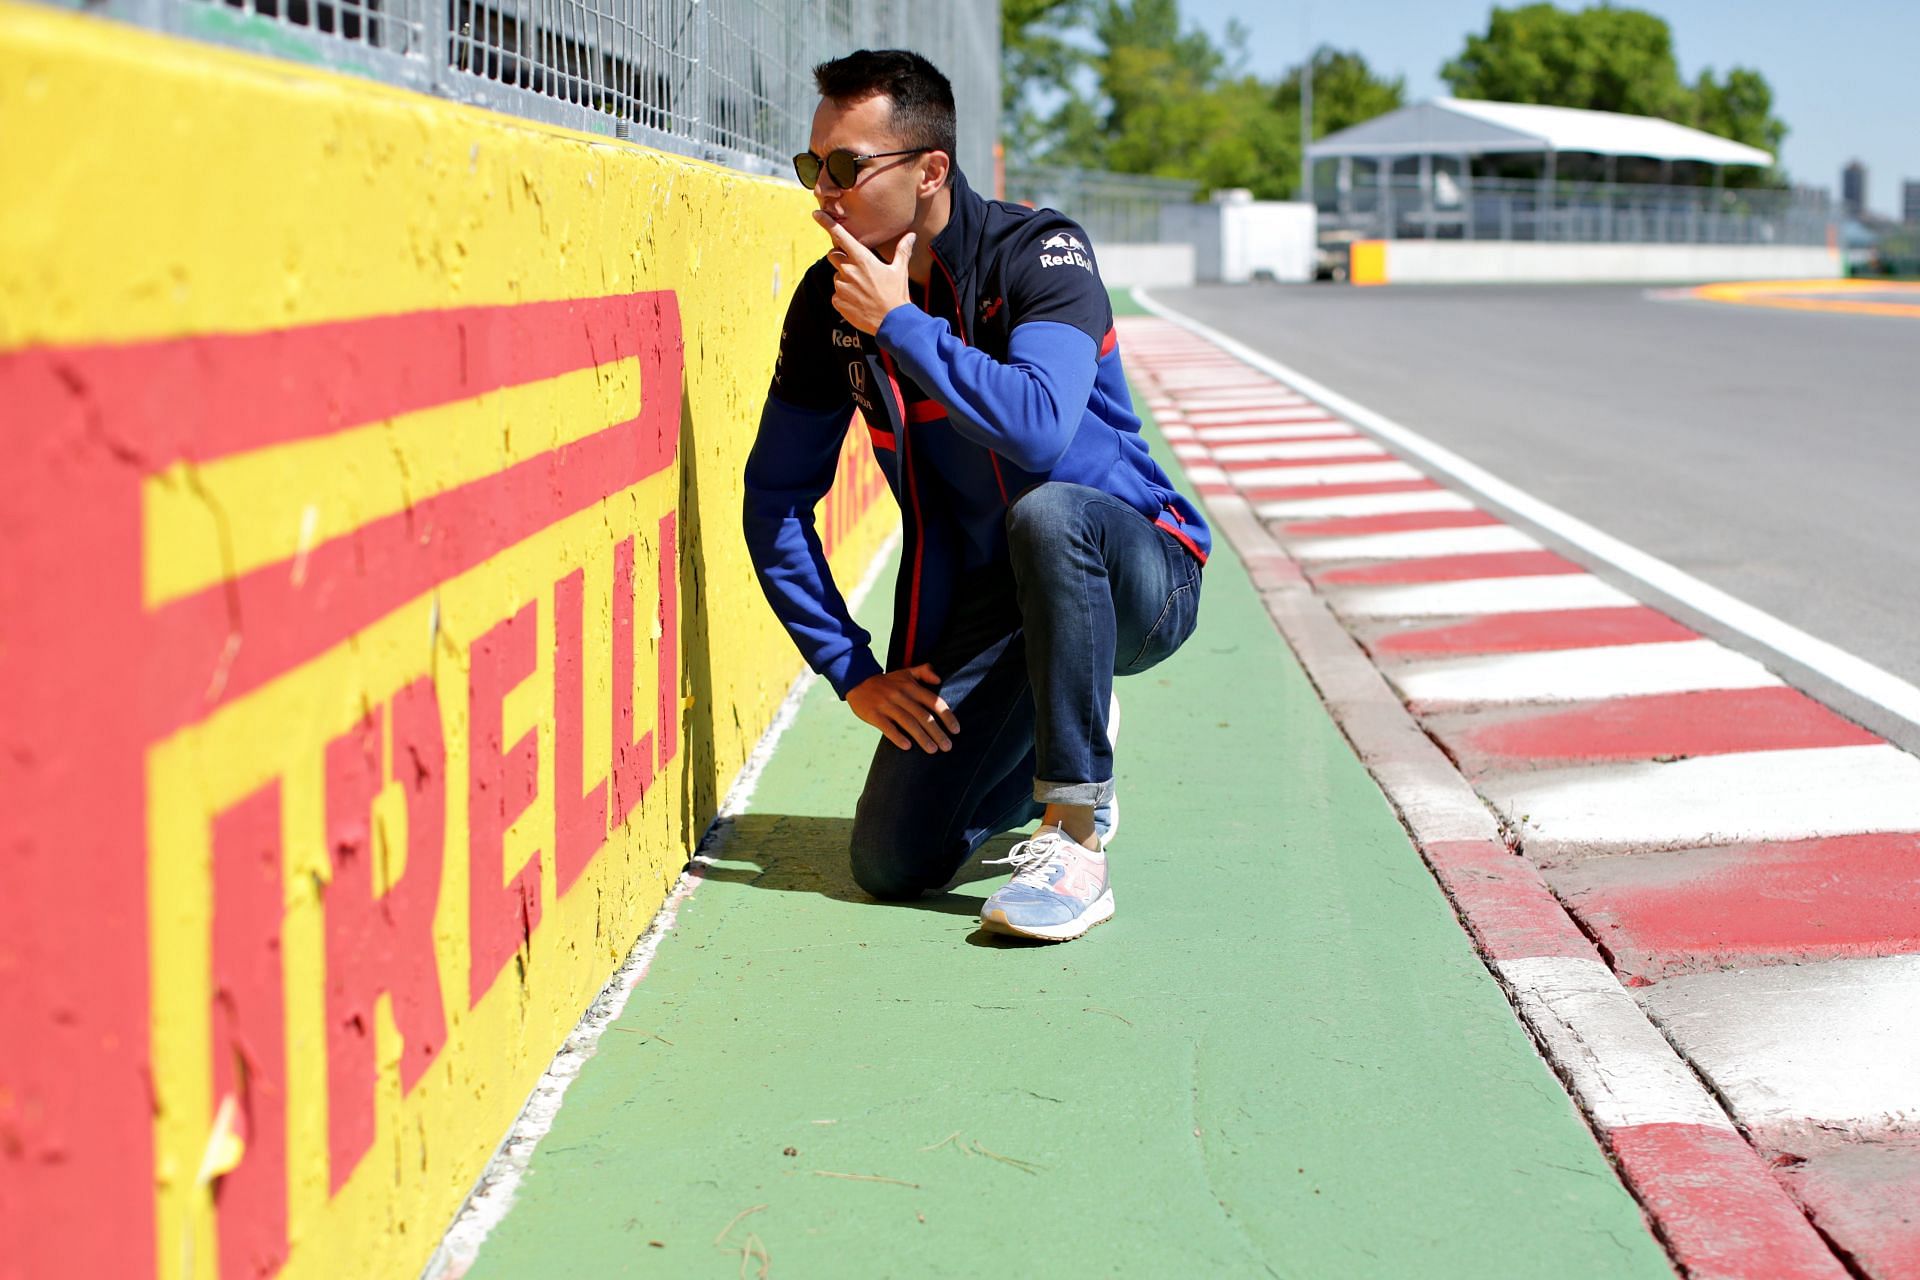 Alex Albon&#039;s iconic inspection of the &#039;Wall of Champions&#039; in 2019 (Photo by Peter Fox/Getty Images)